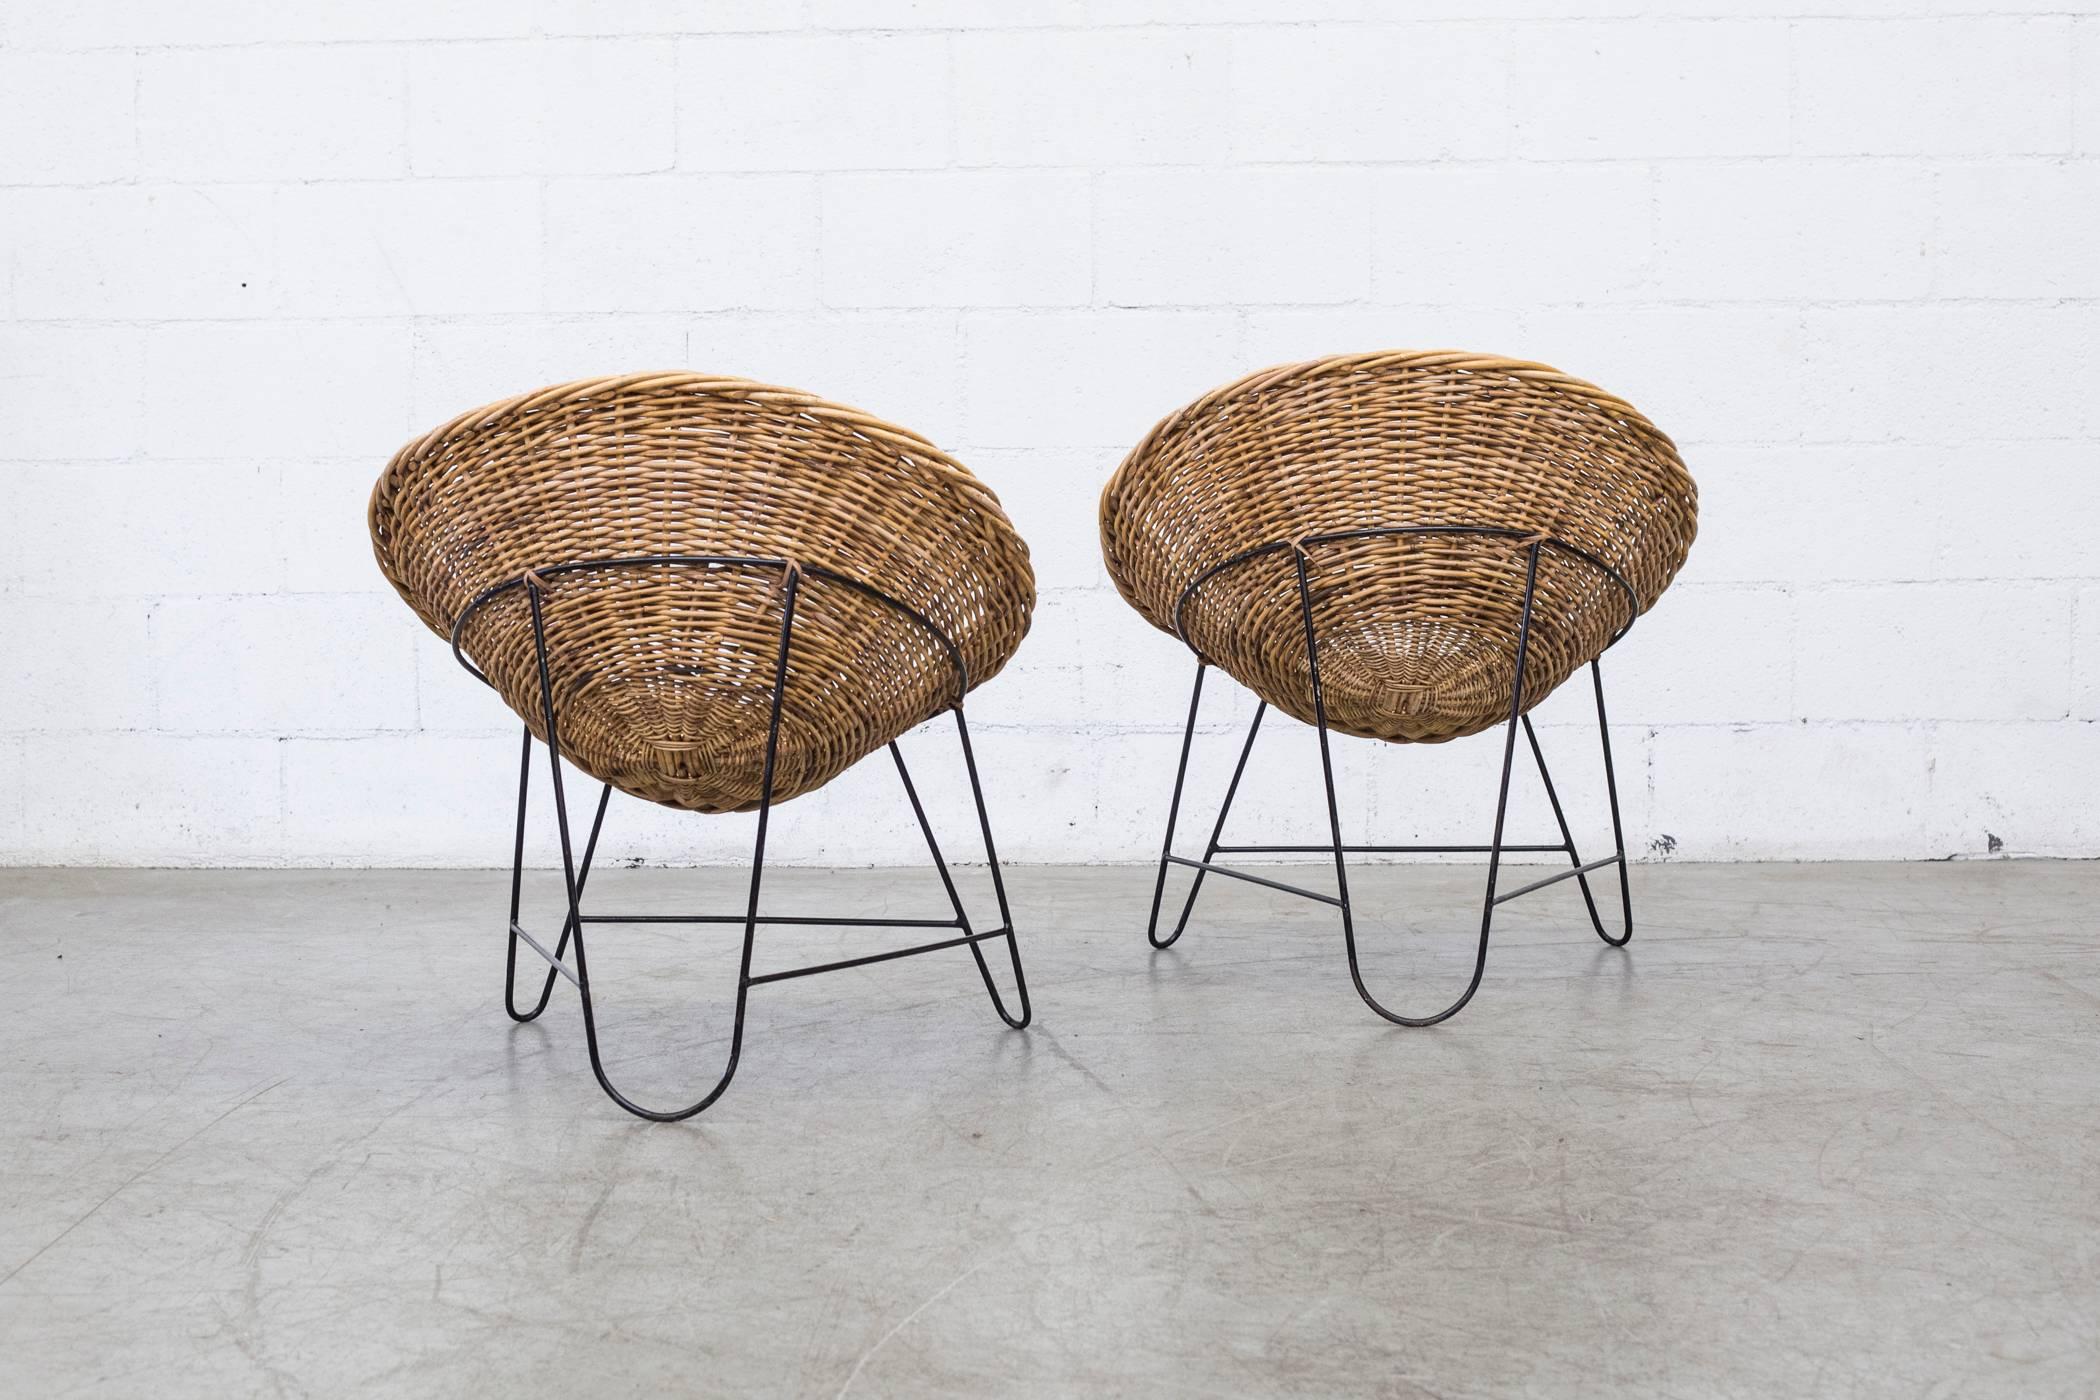 Enameled Jacques Adnet Style Woven Basket Chairs